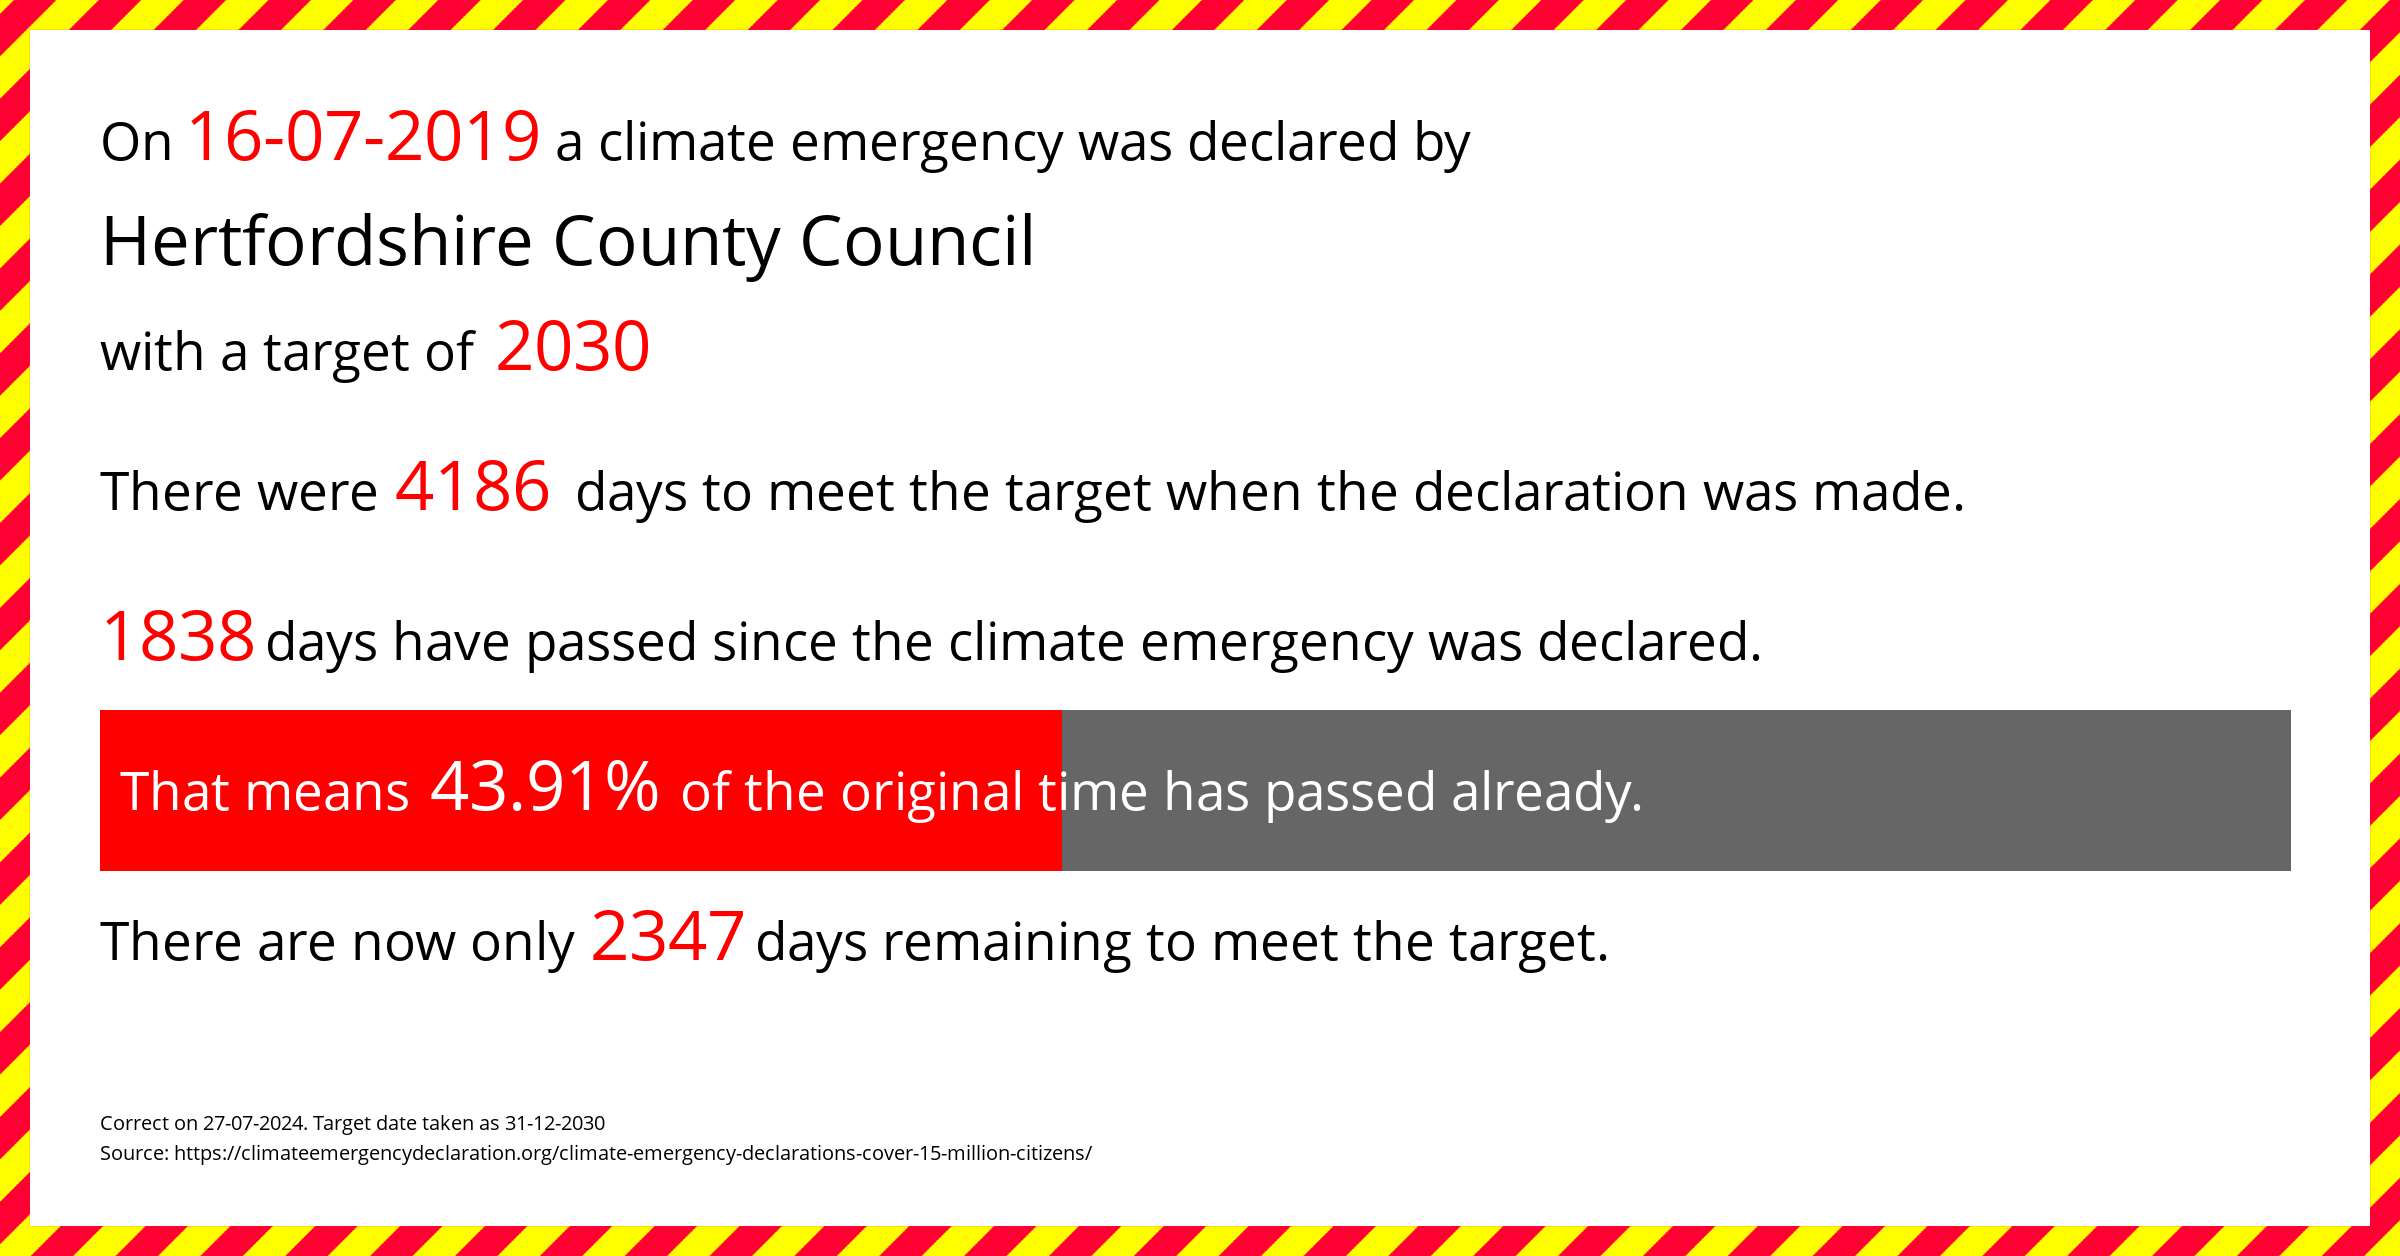 Hertfordshire County Council declared a Climate emergency on Tuesday 16th July 2019, with a target of 2030.